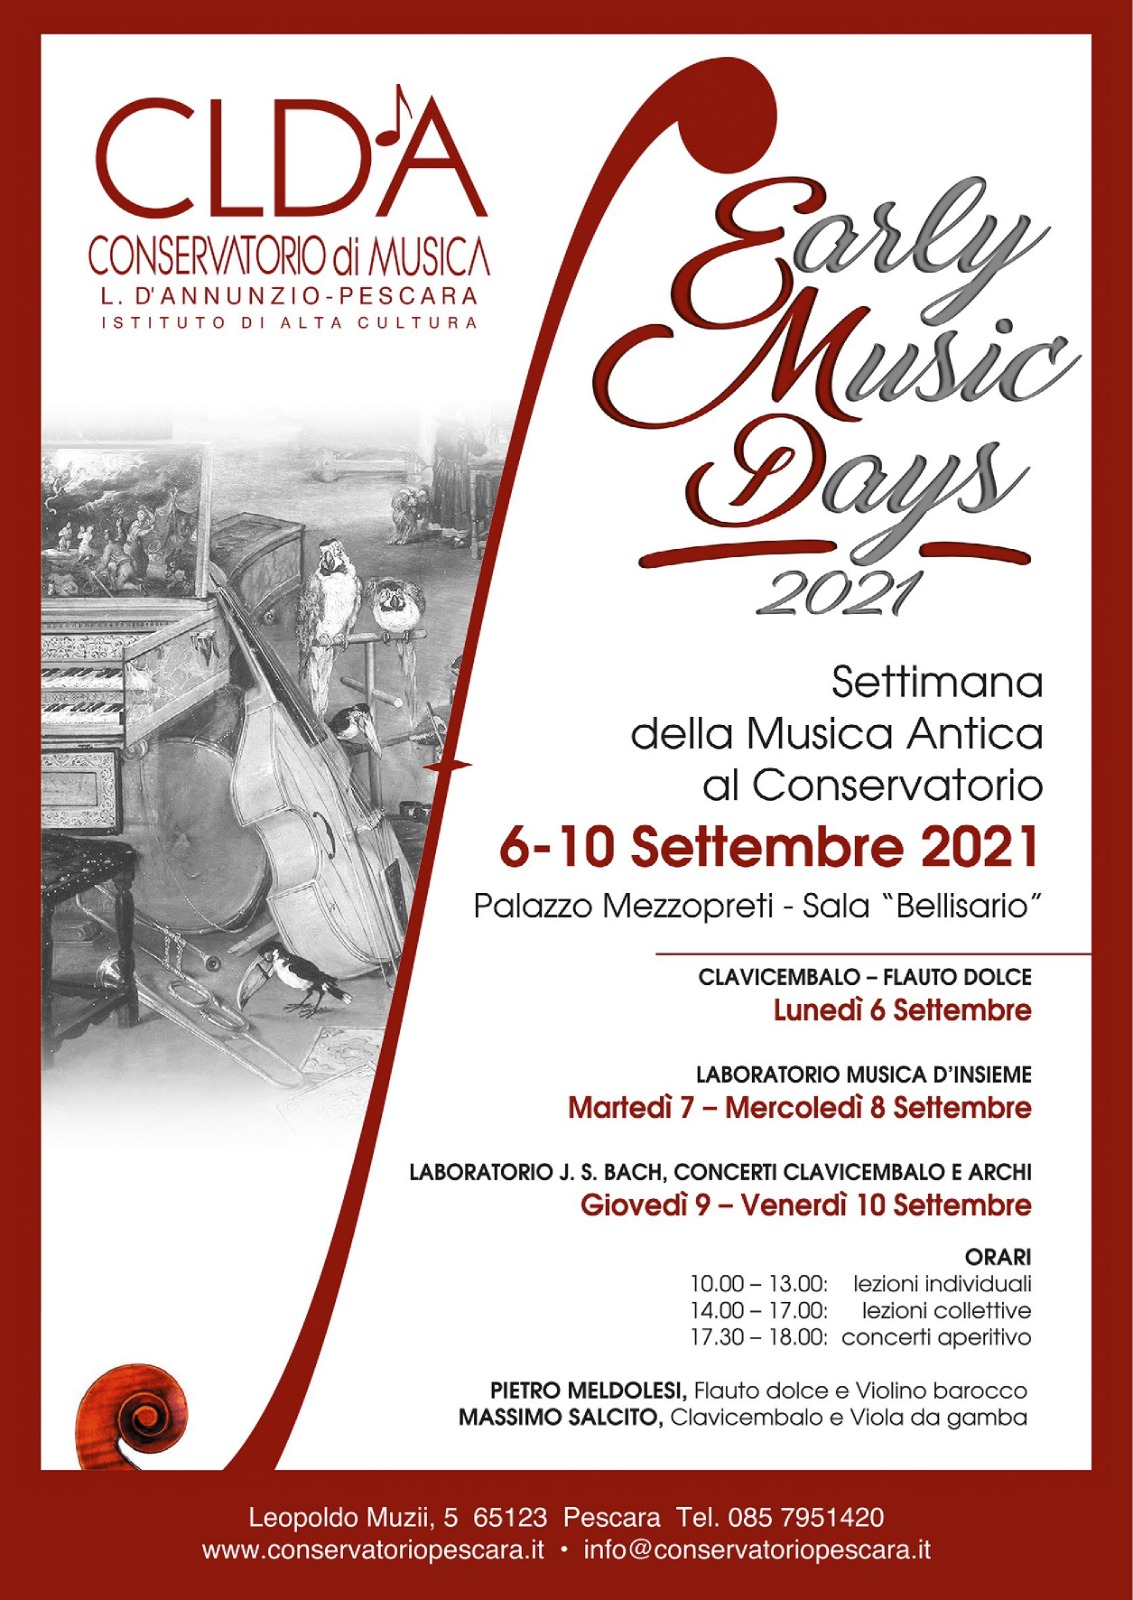 EARLY MUSIC DAYS 2021 CONSPE